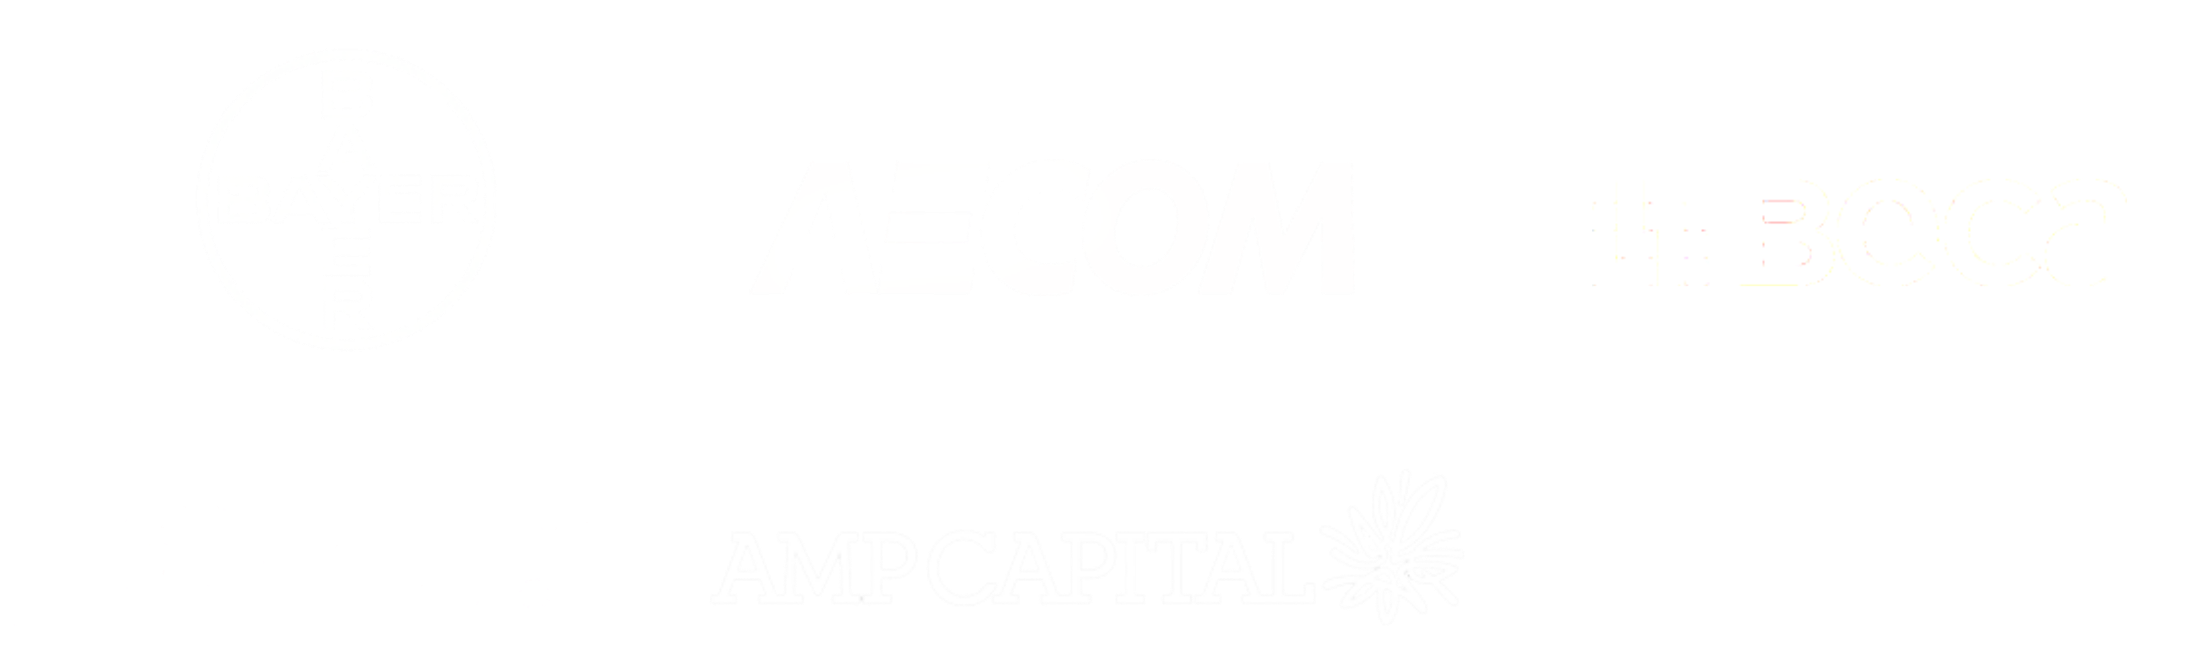 DGM is also proud to be associated with Bayer, Aecom, Beca, Contact Energy, AMP Capital and Harcourts.